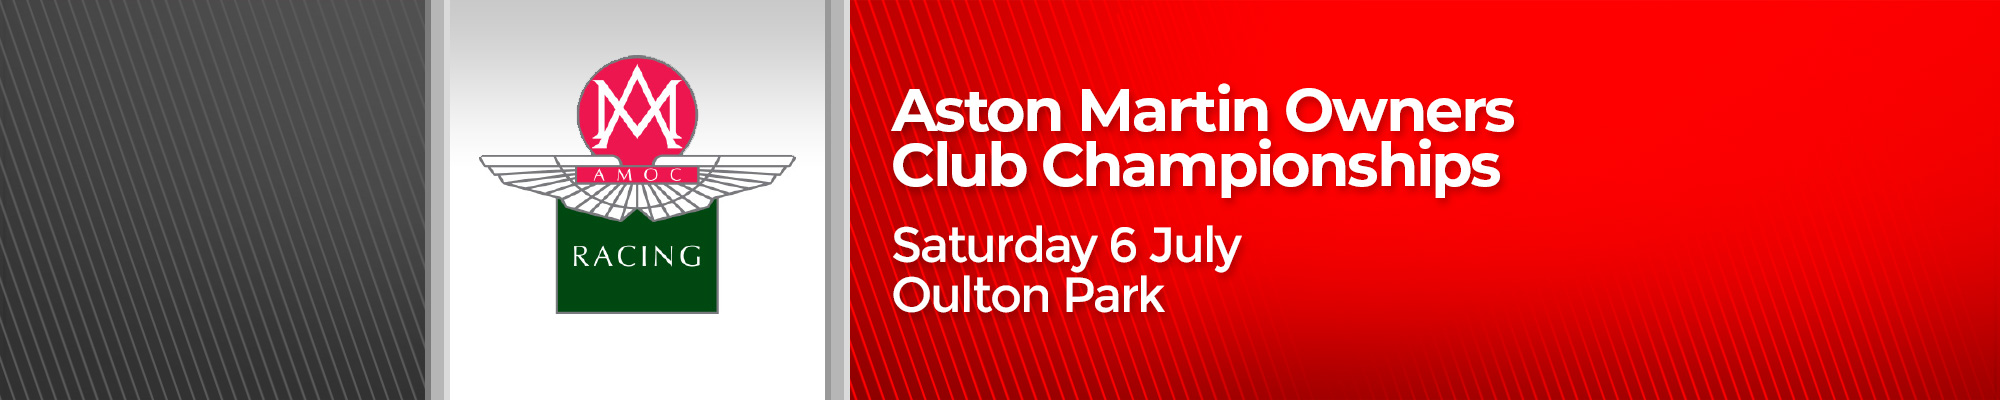 Aston Martin Owners' Club Championships